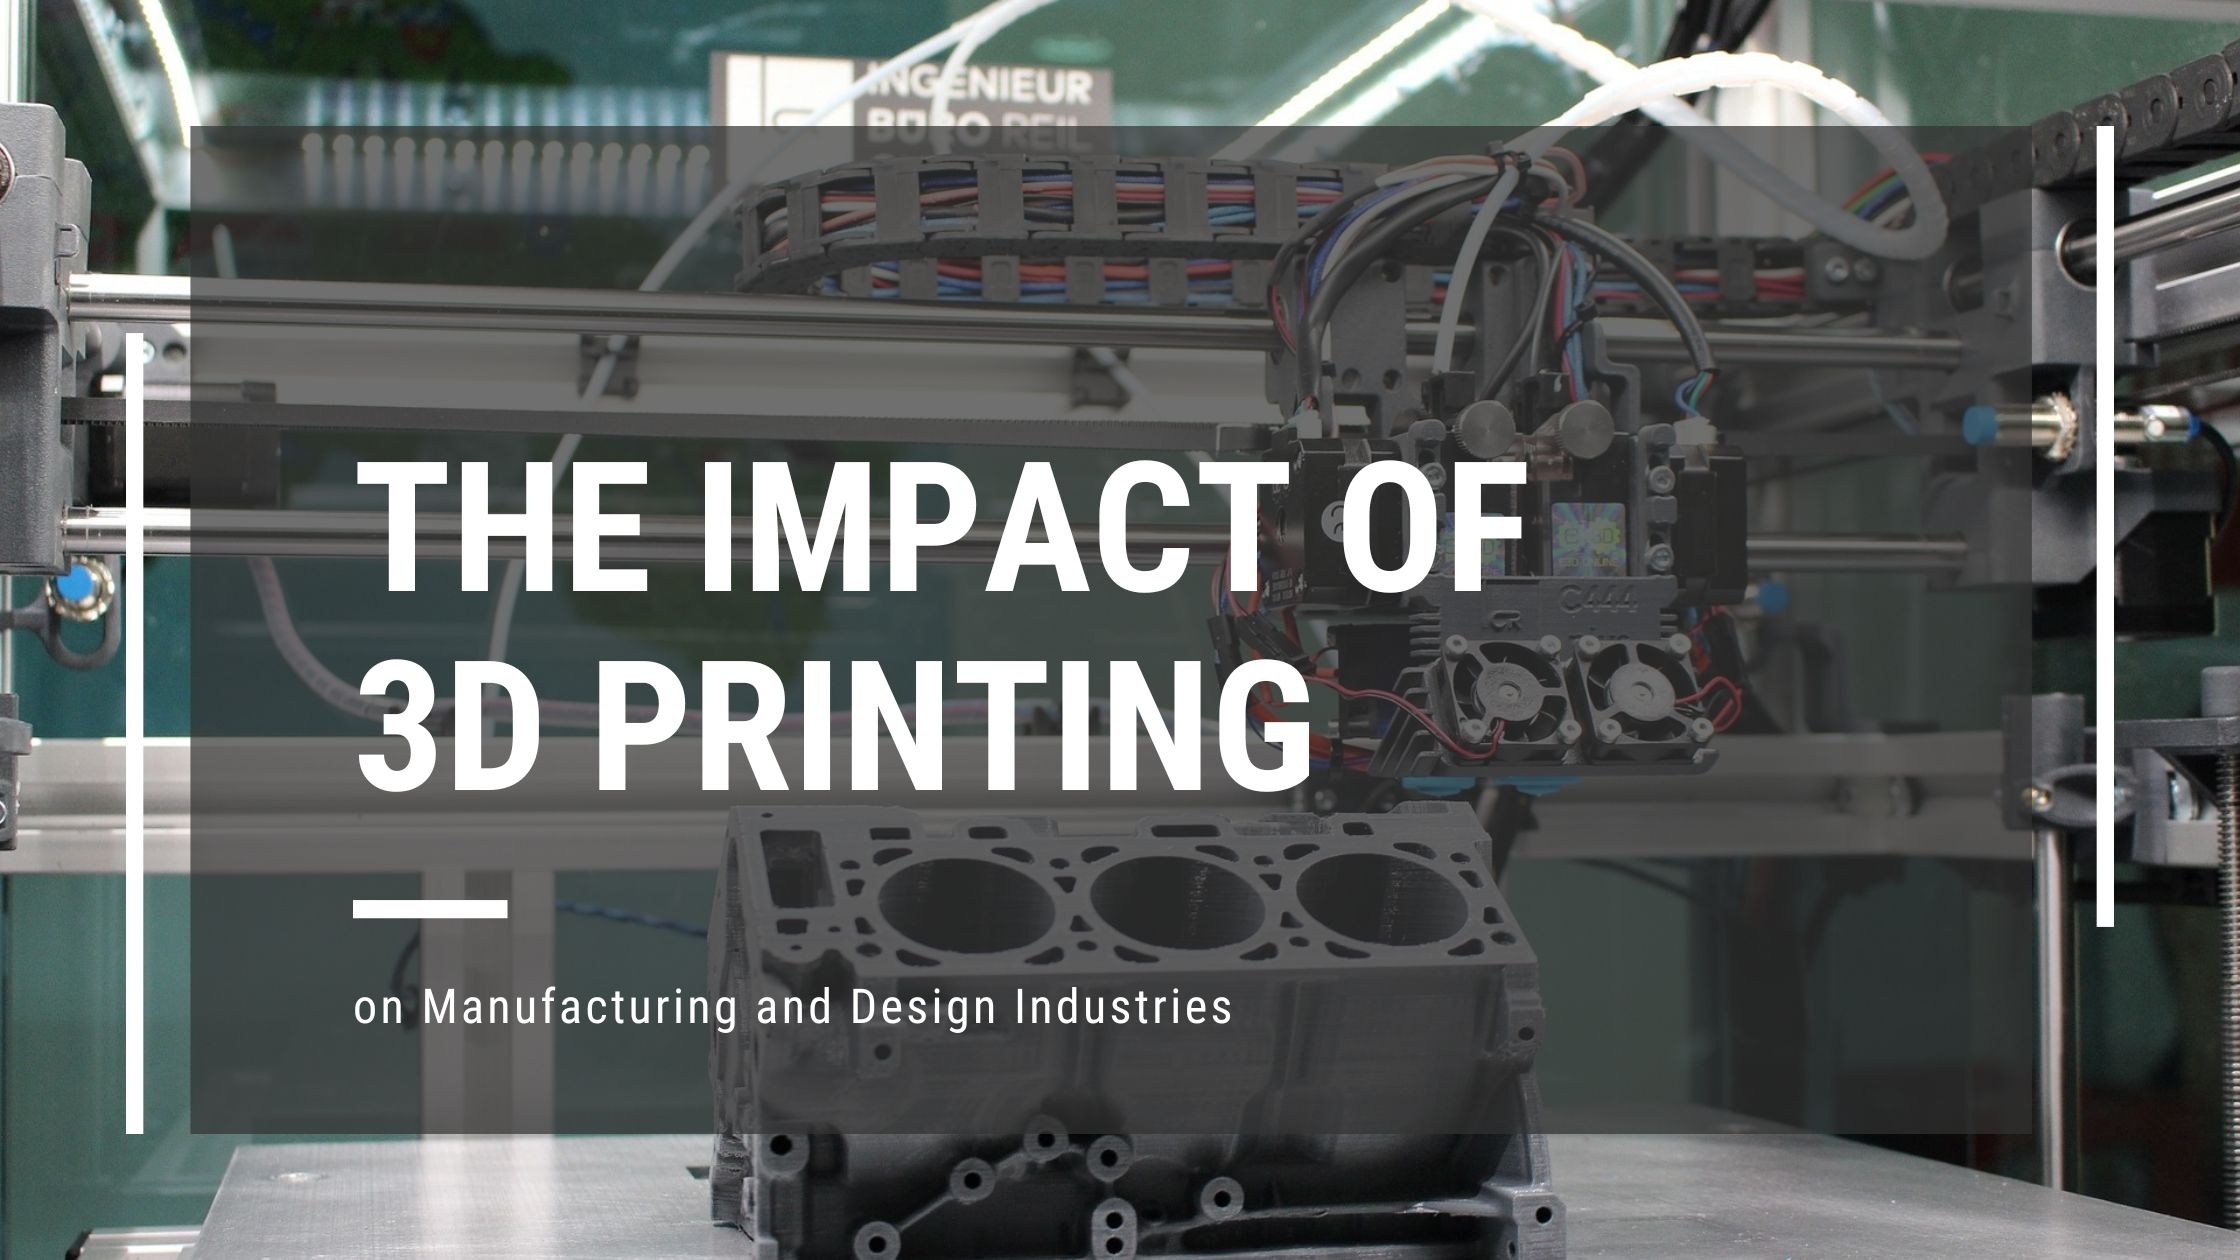 How 3D Printing Impacts Manufacturing